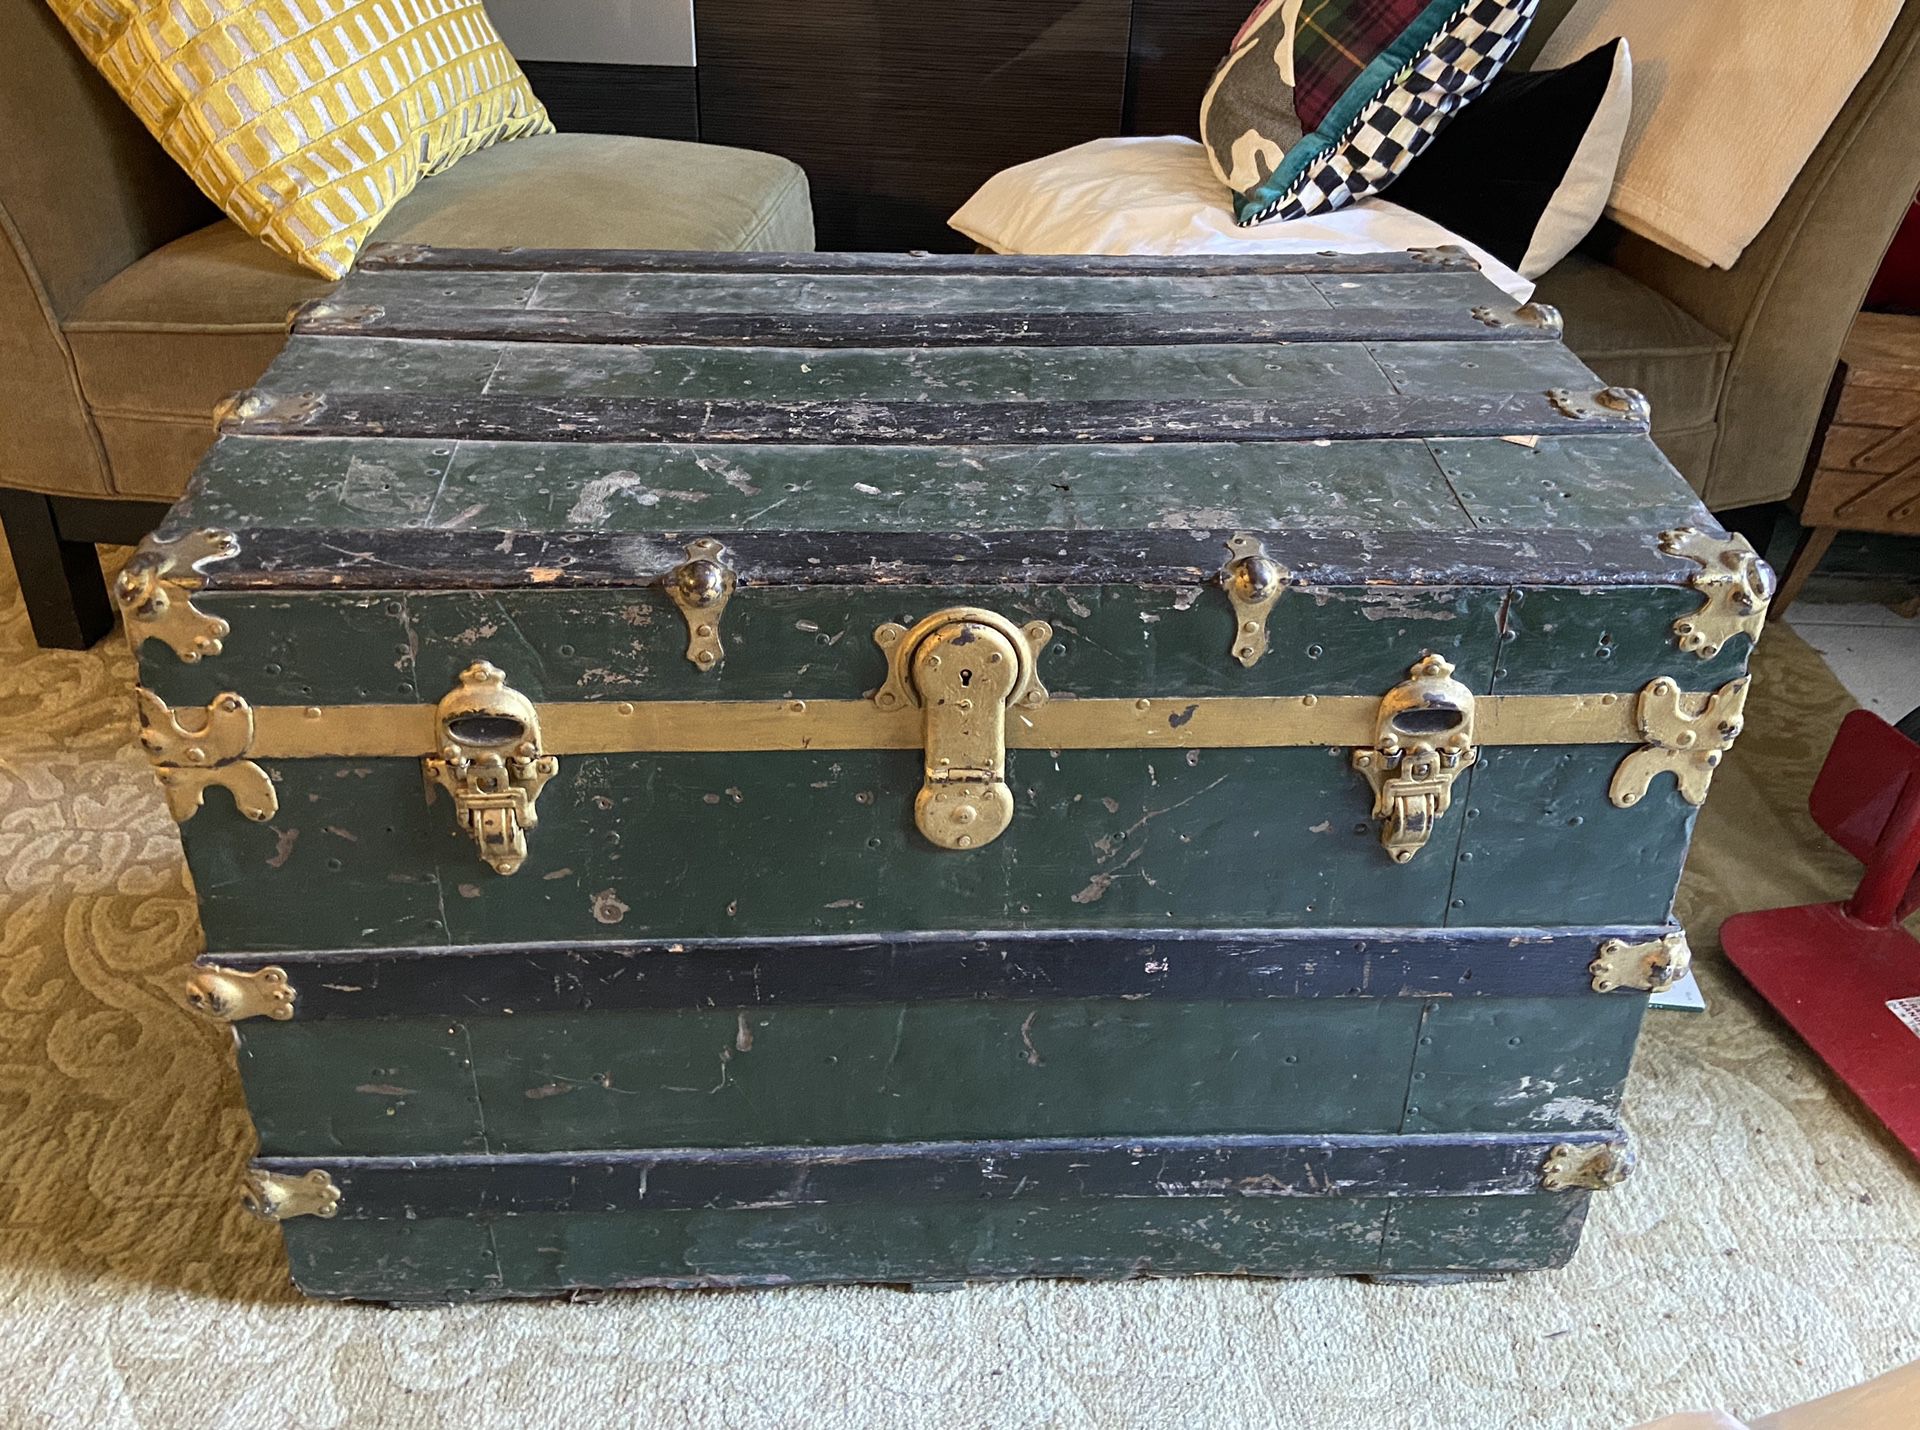 Jumbo Vintage Steamer Trunk, Second Use Building Materials and Salvage